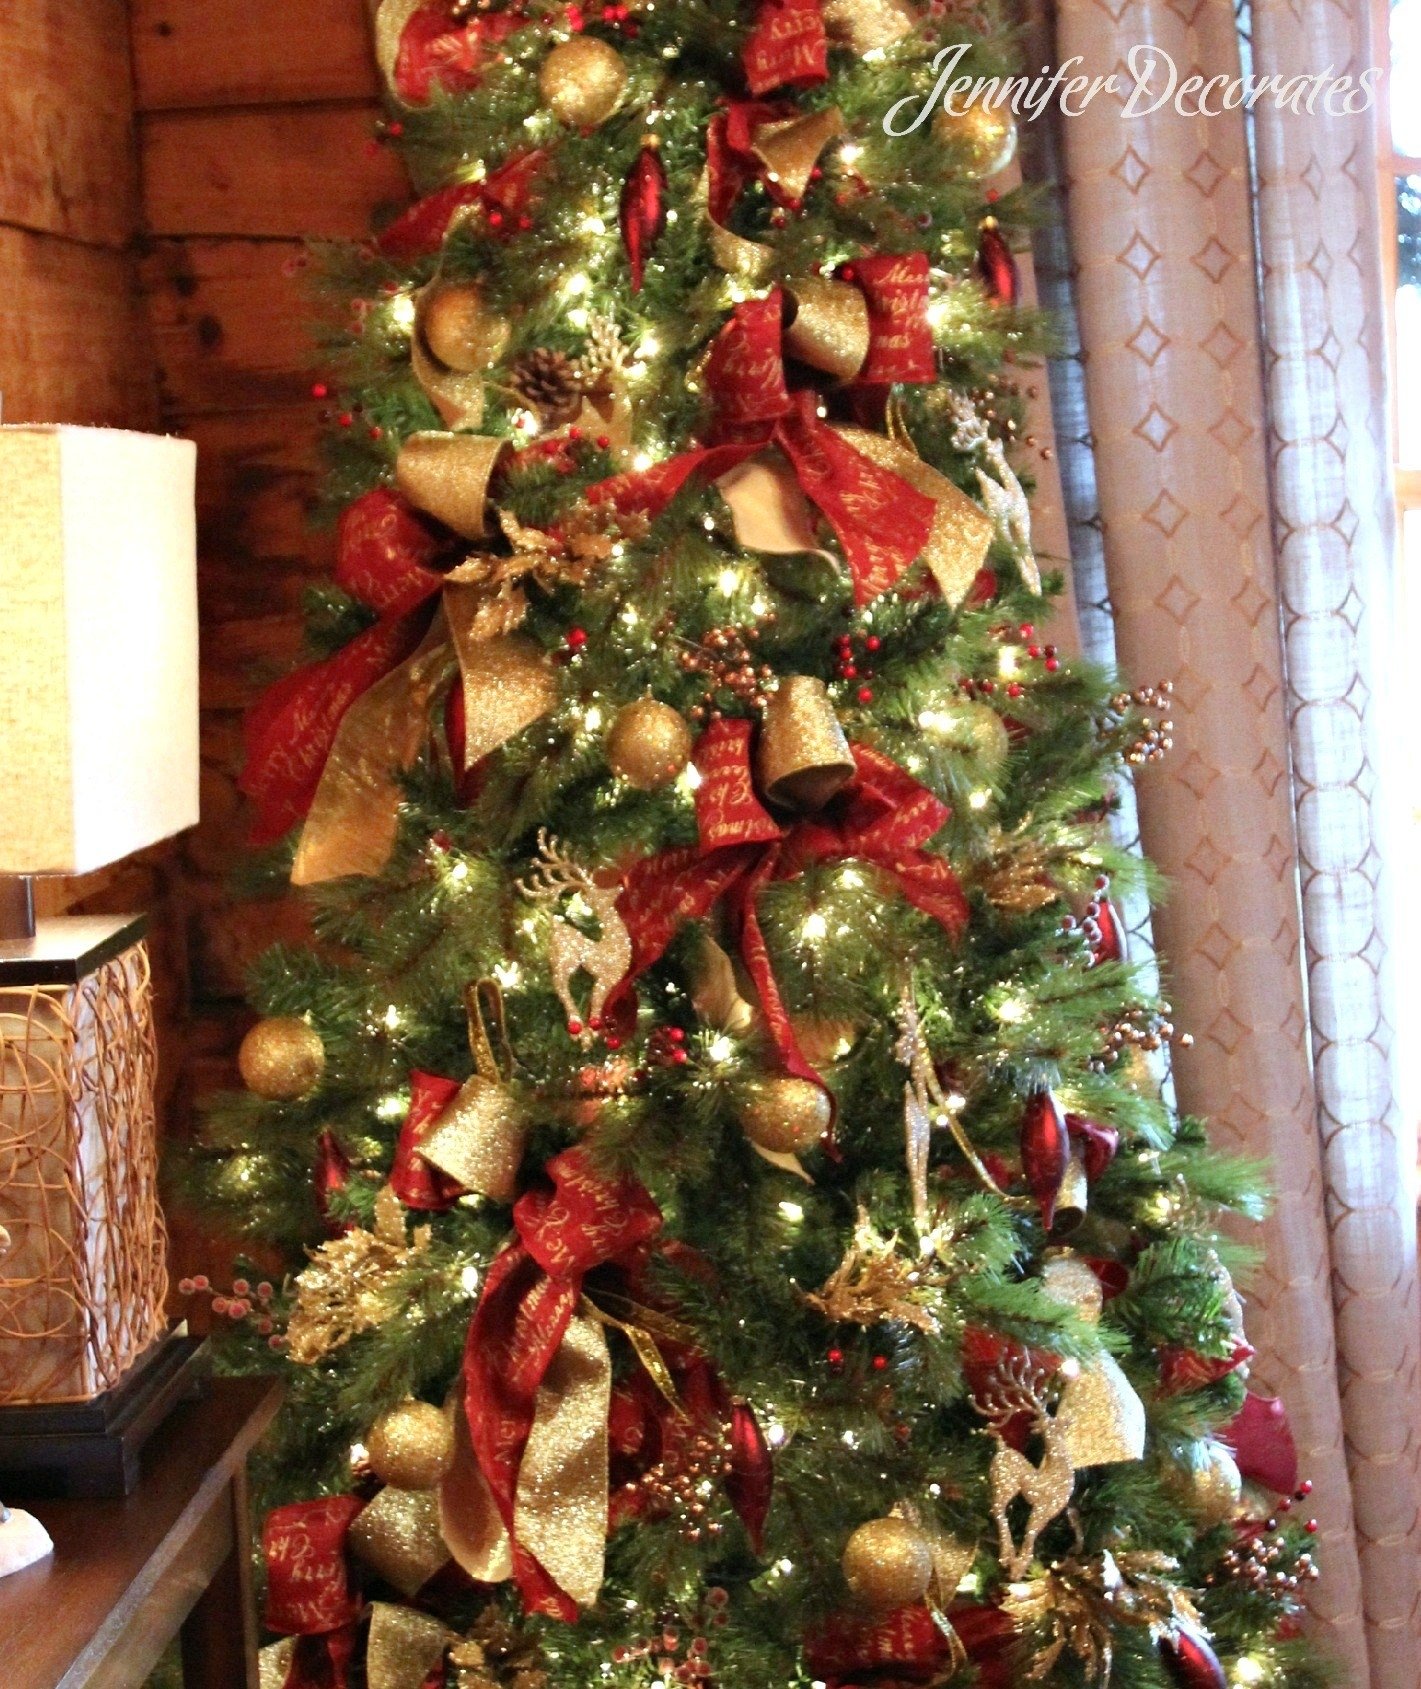 10 Famous Country Christmas Tree Decorating Ideas country christmas decorating ideas jennifer decorates the dining 2022